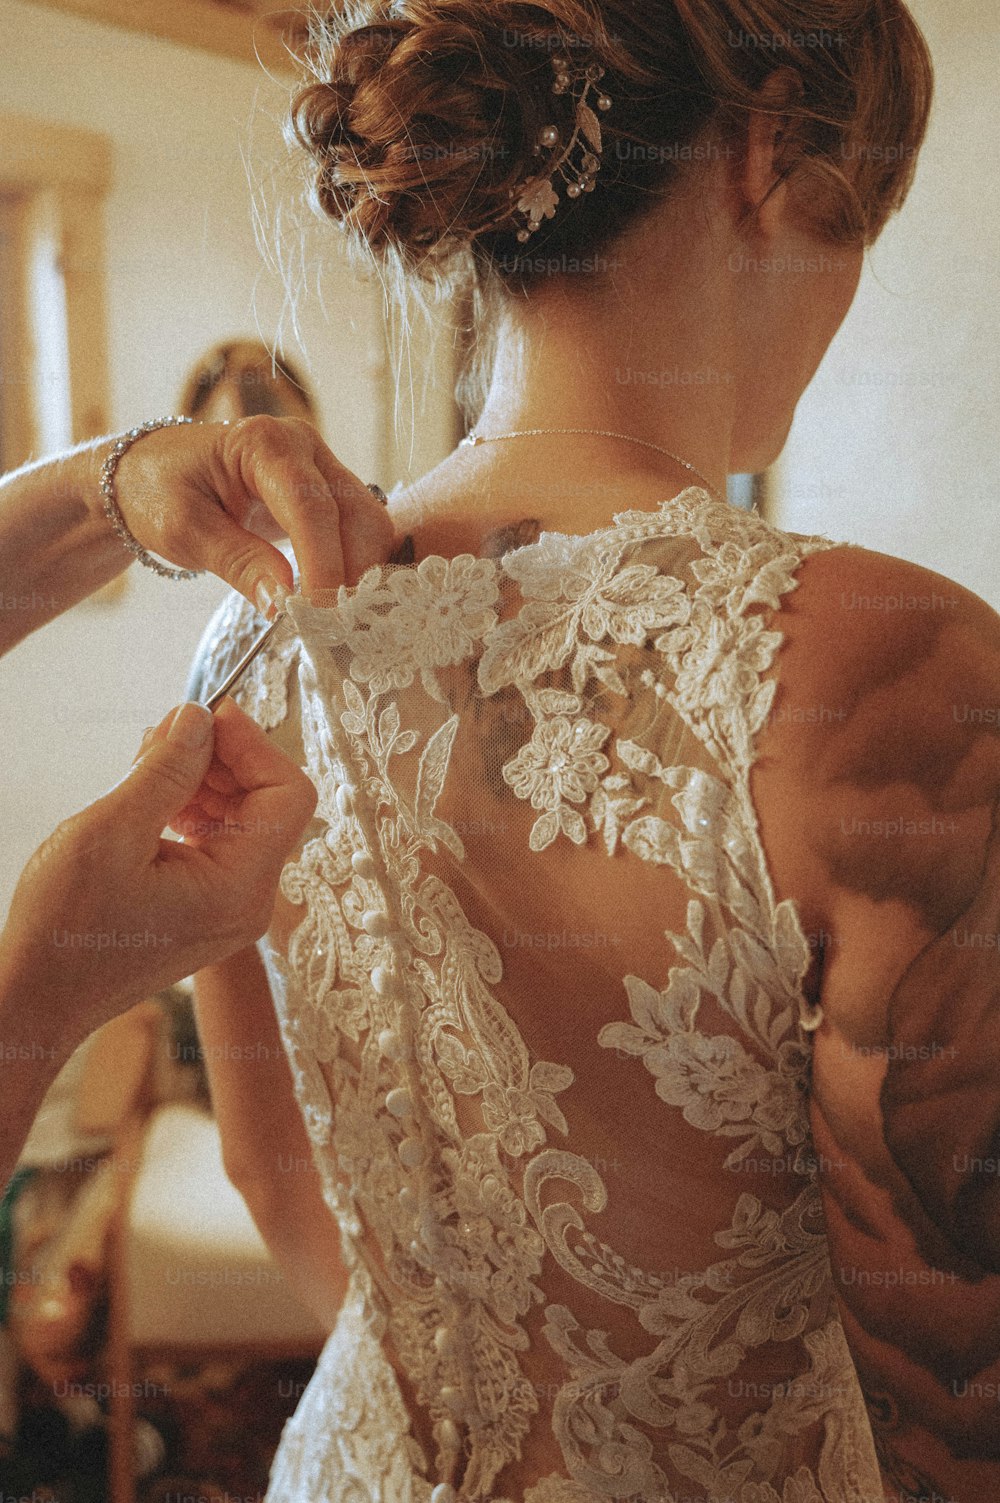 a woman in a wedding dress getting ready for her wedding